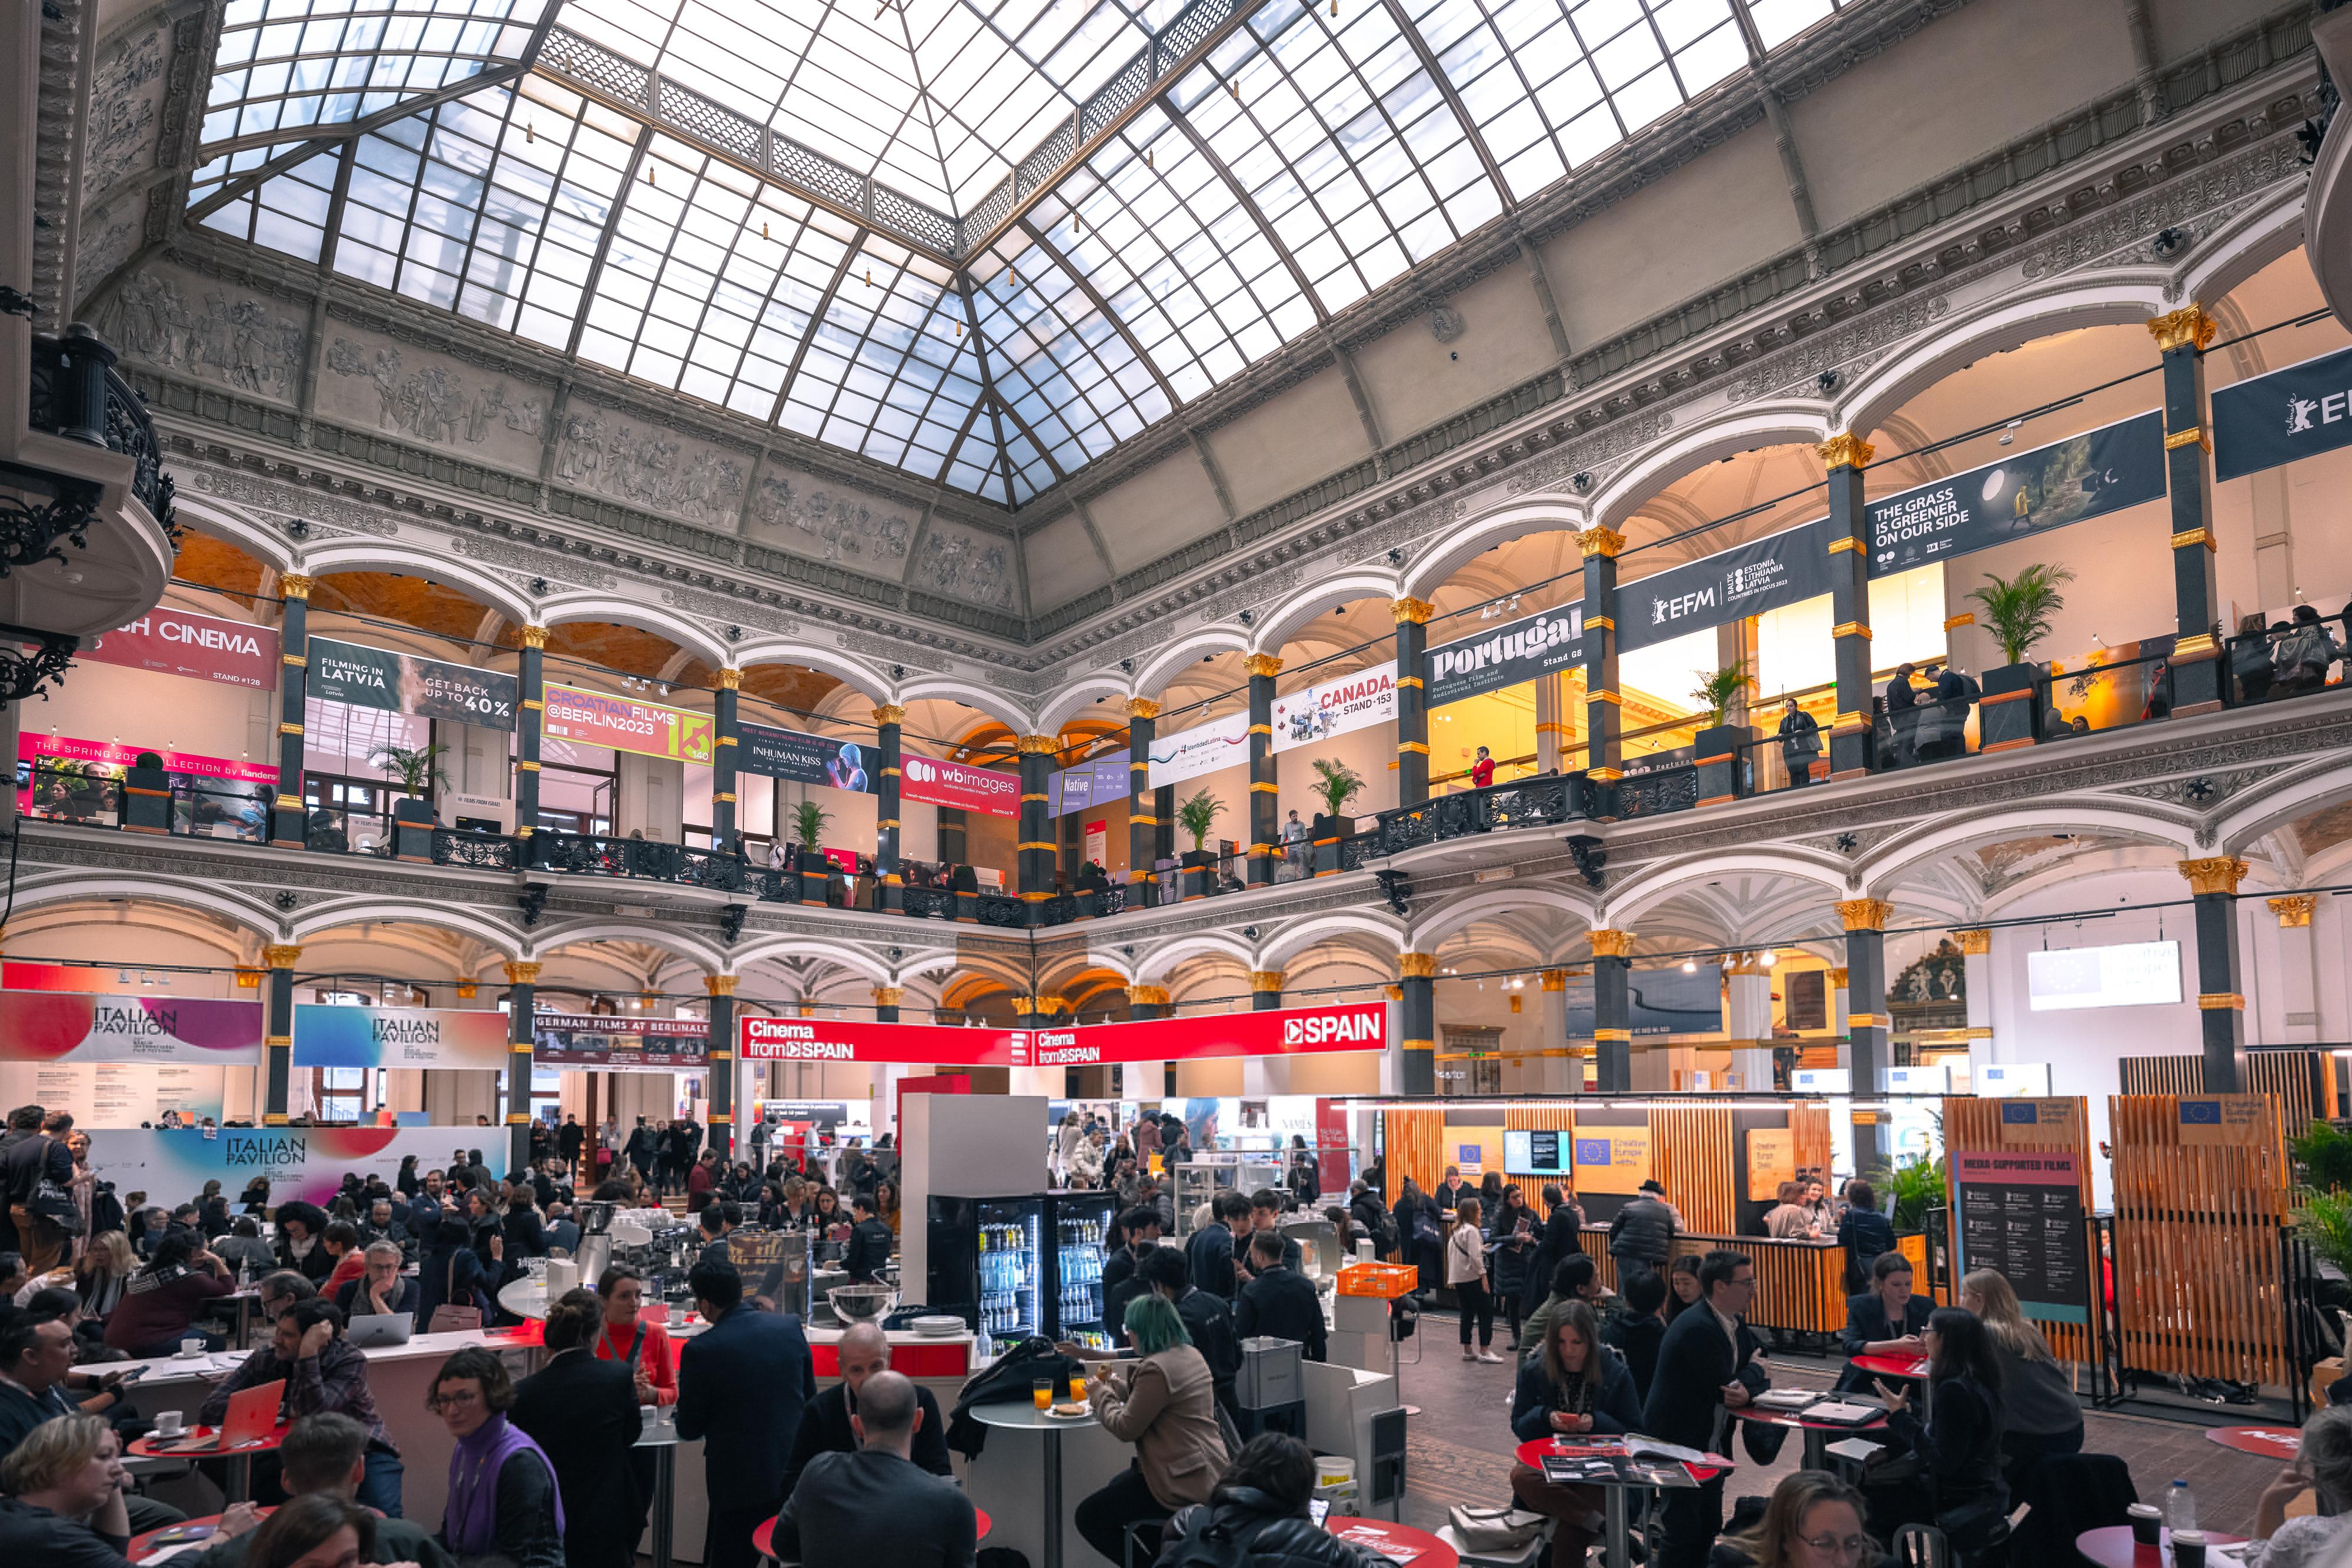 The atrium of the Gropius Bau is filled with EFM exhibition stands.